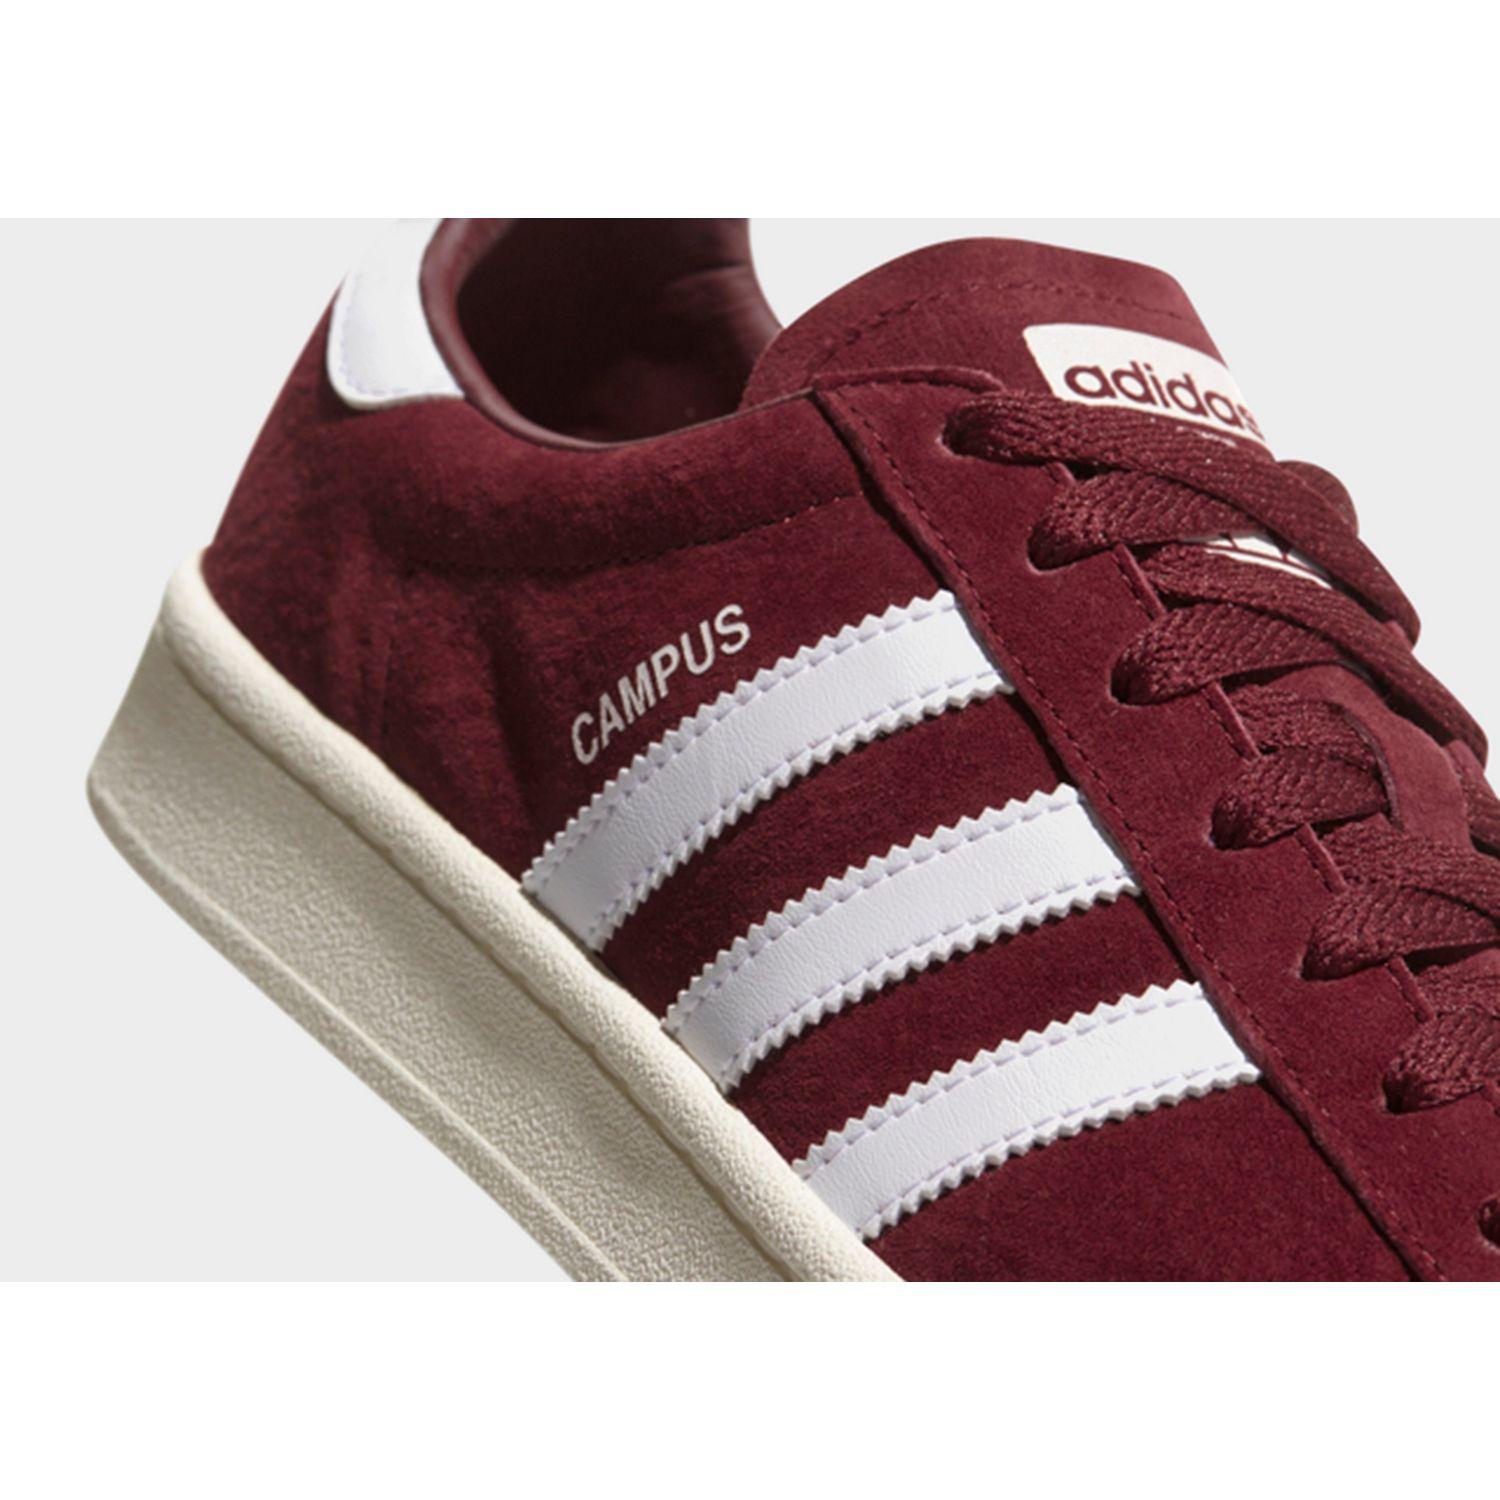 adidas campus shoes red